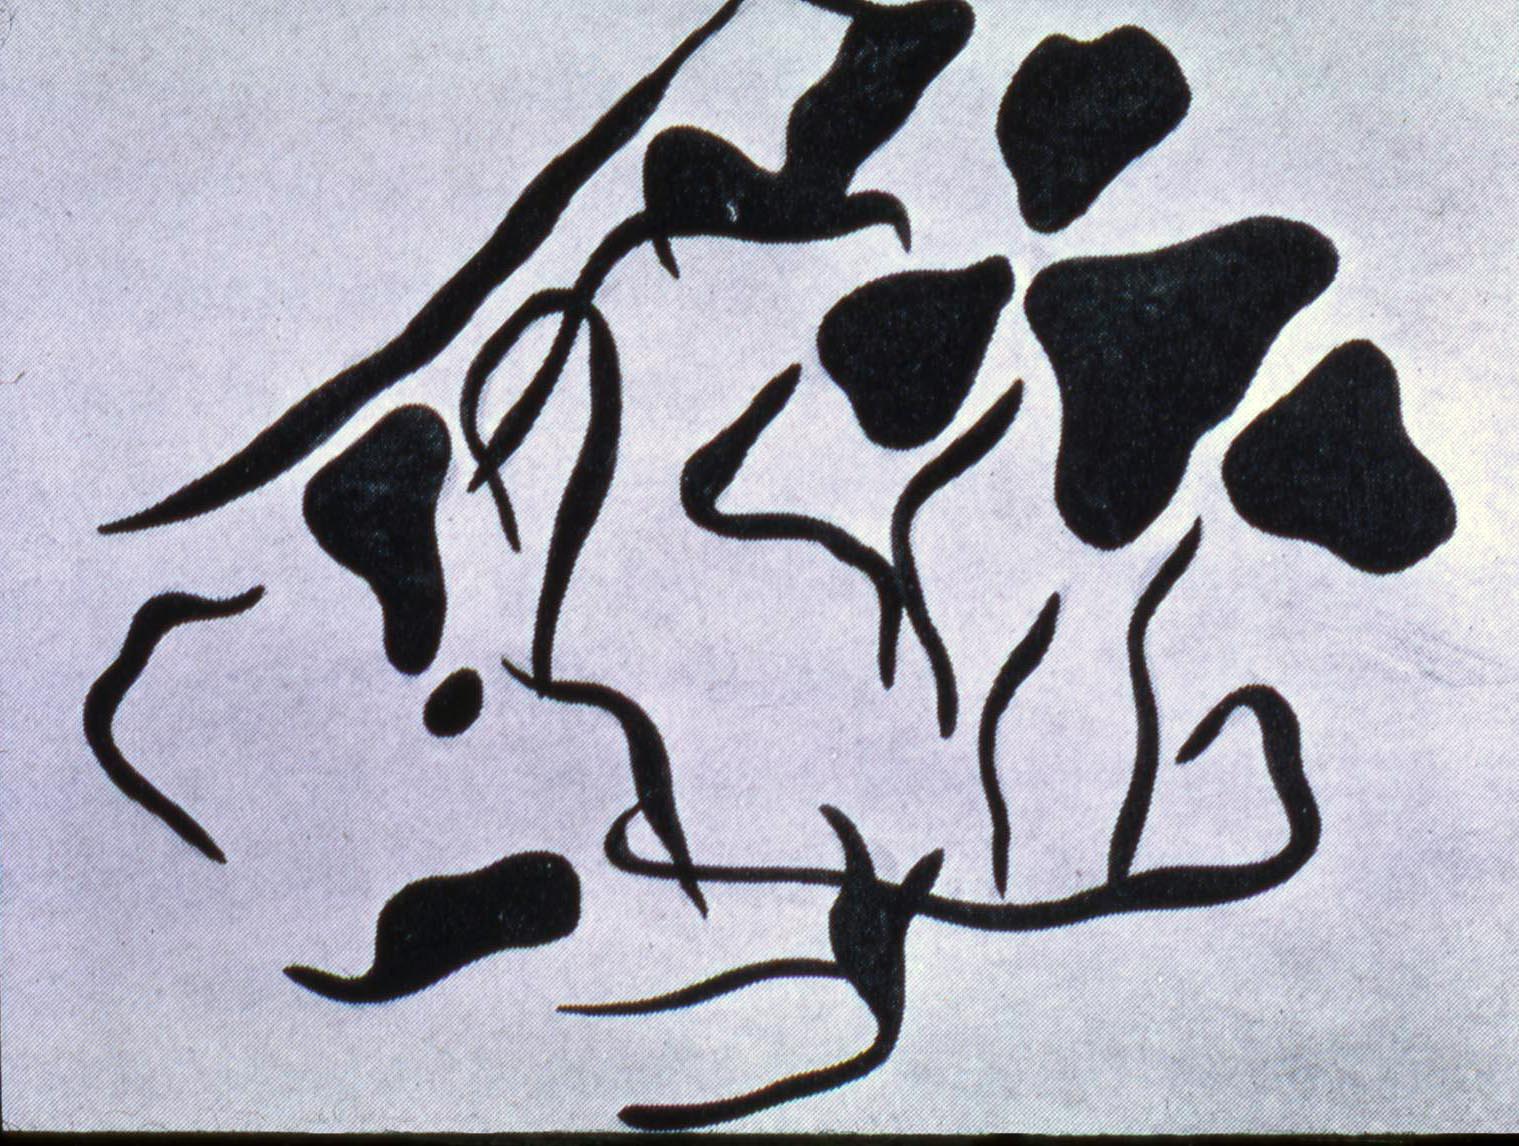 https://uploads6.wikiart.org/images/jean-arp/automatic-drawing.jpg